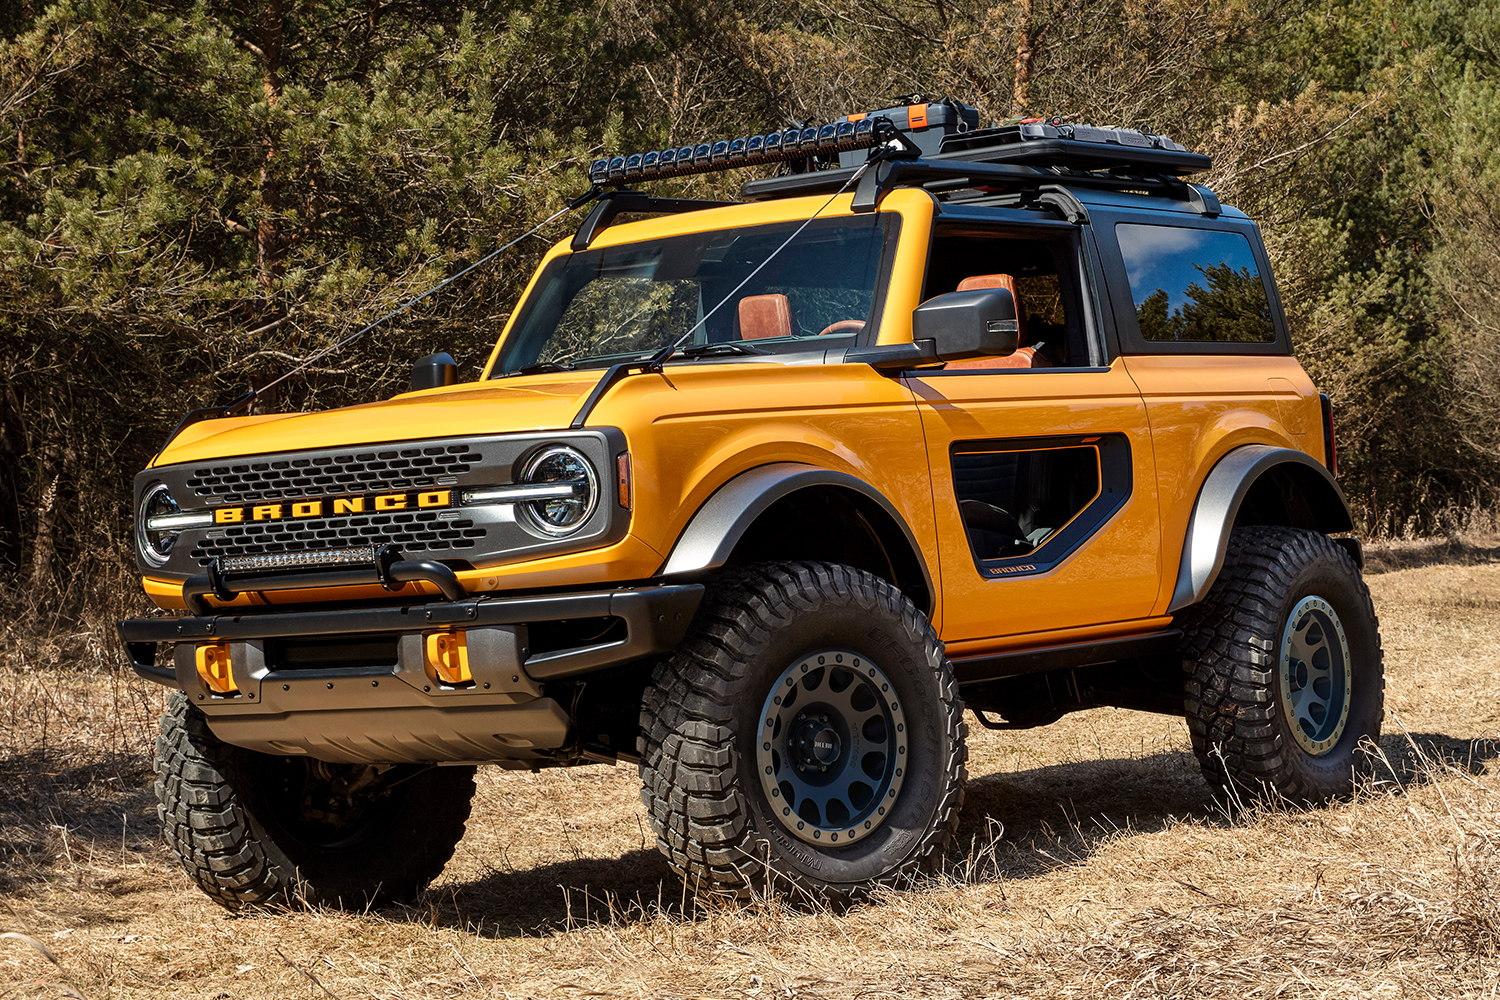 A new Ford Bronco SUV with two doors, featuring cutouts, and a Cyber Orange paint job, sitting still in dry grass with a wooded area in the background